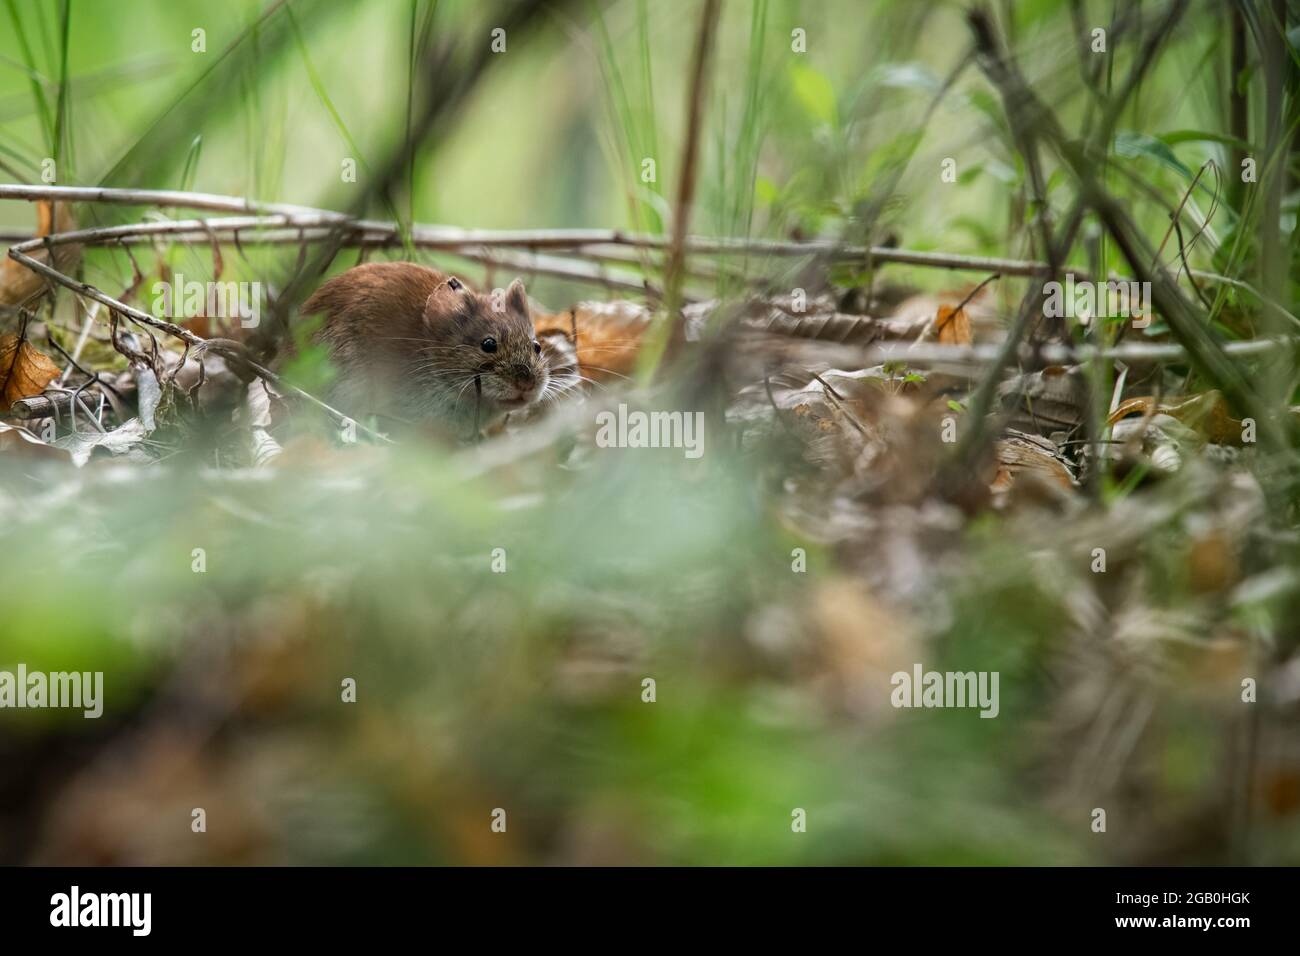 Small rodent in the grass, the common vole (Microtus arvalis). Stock Photo